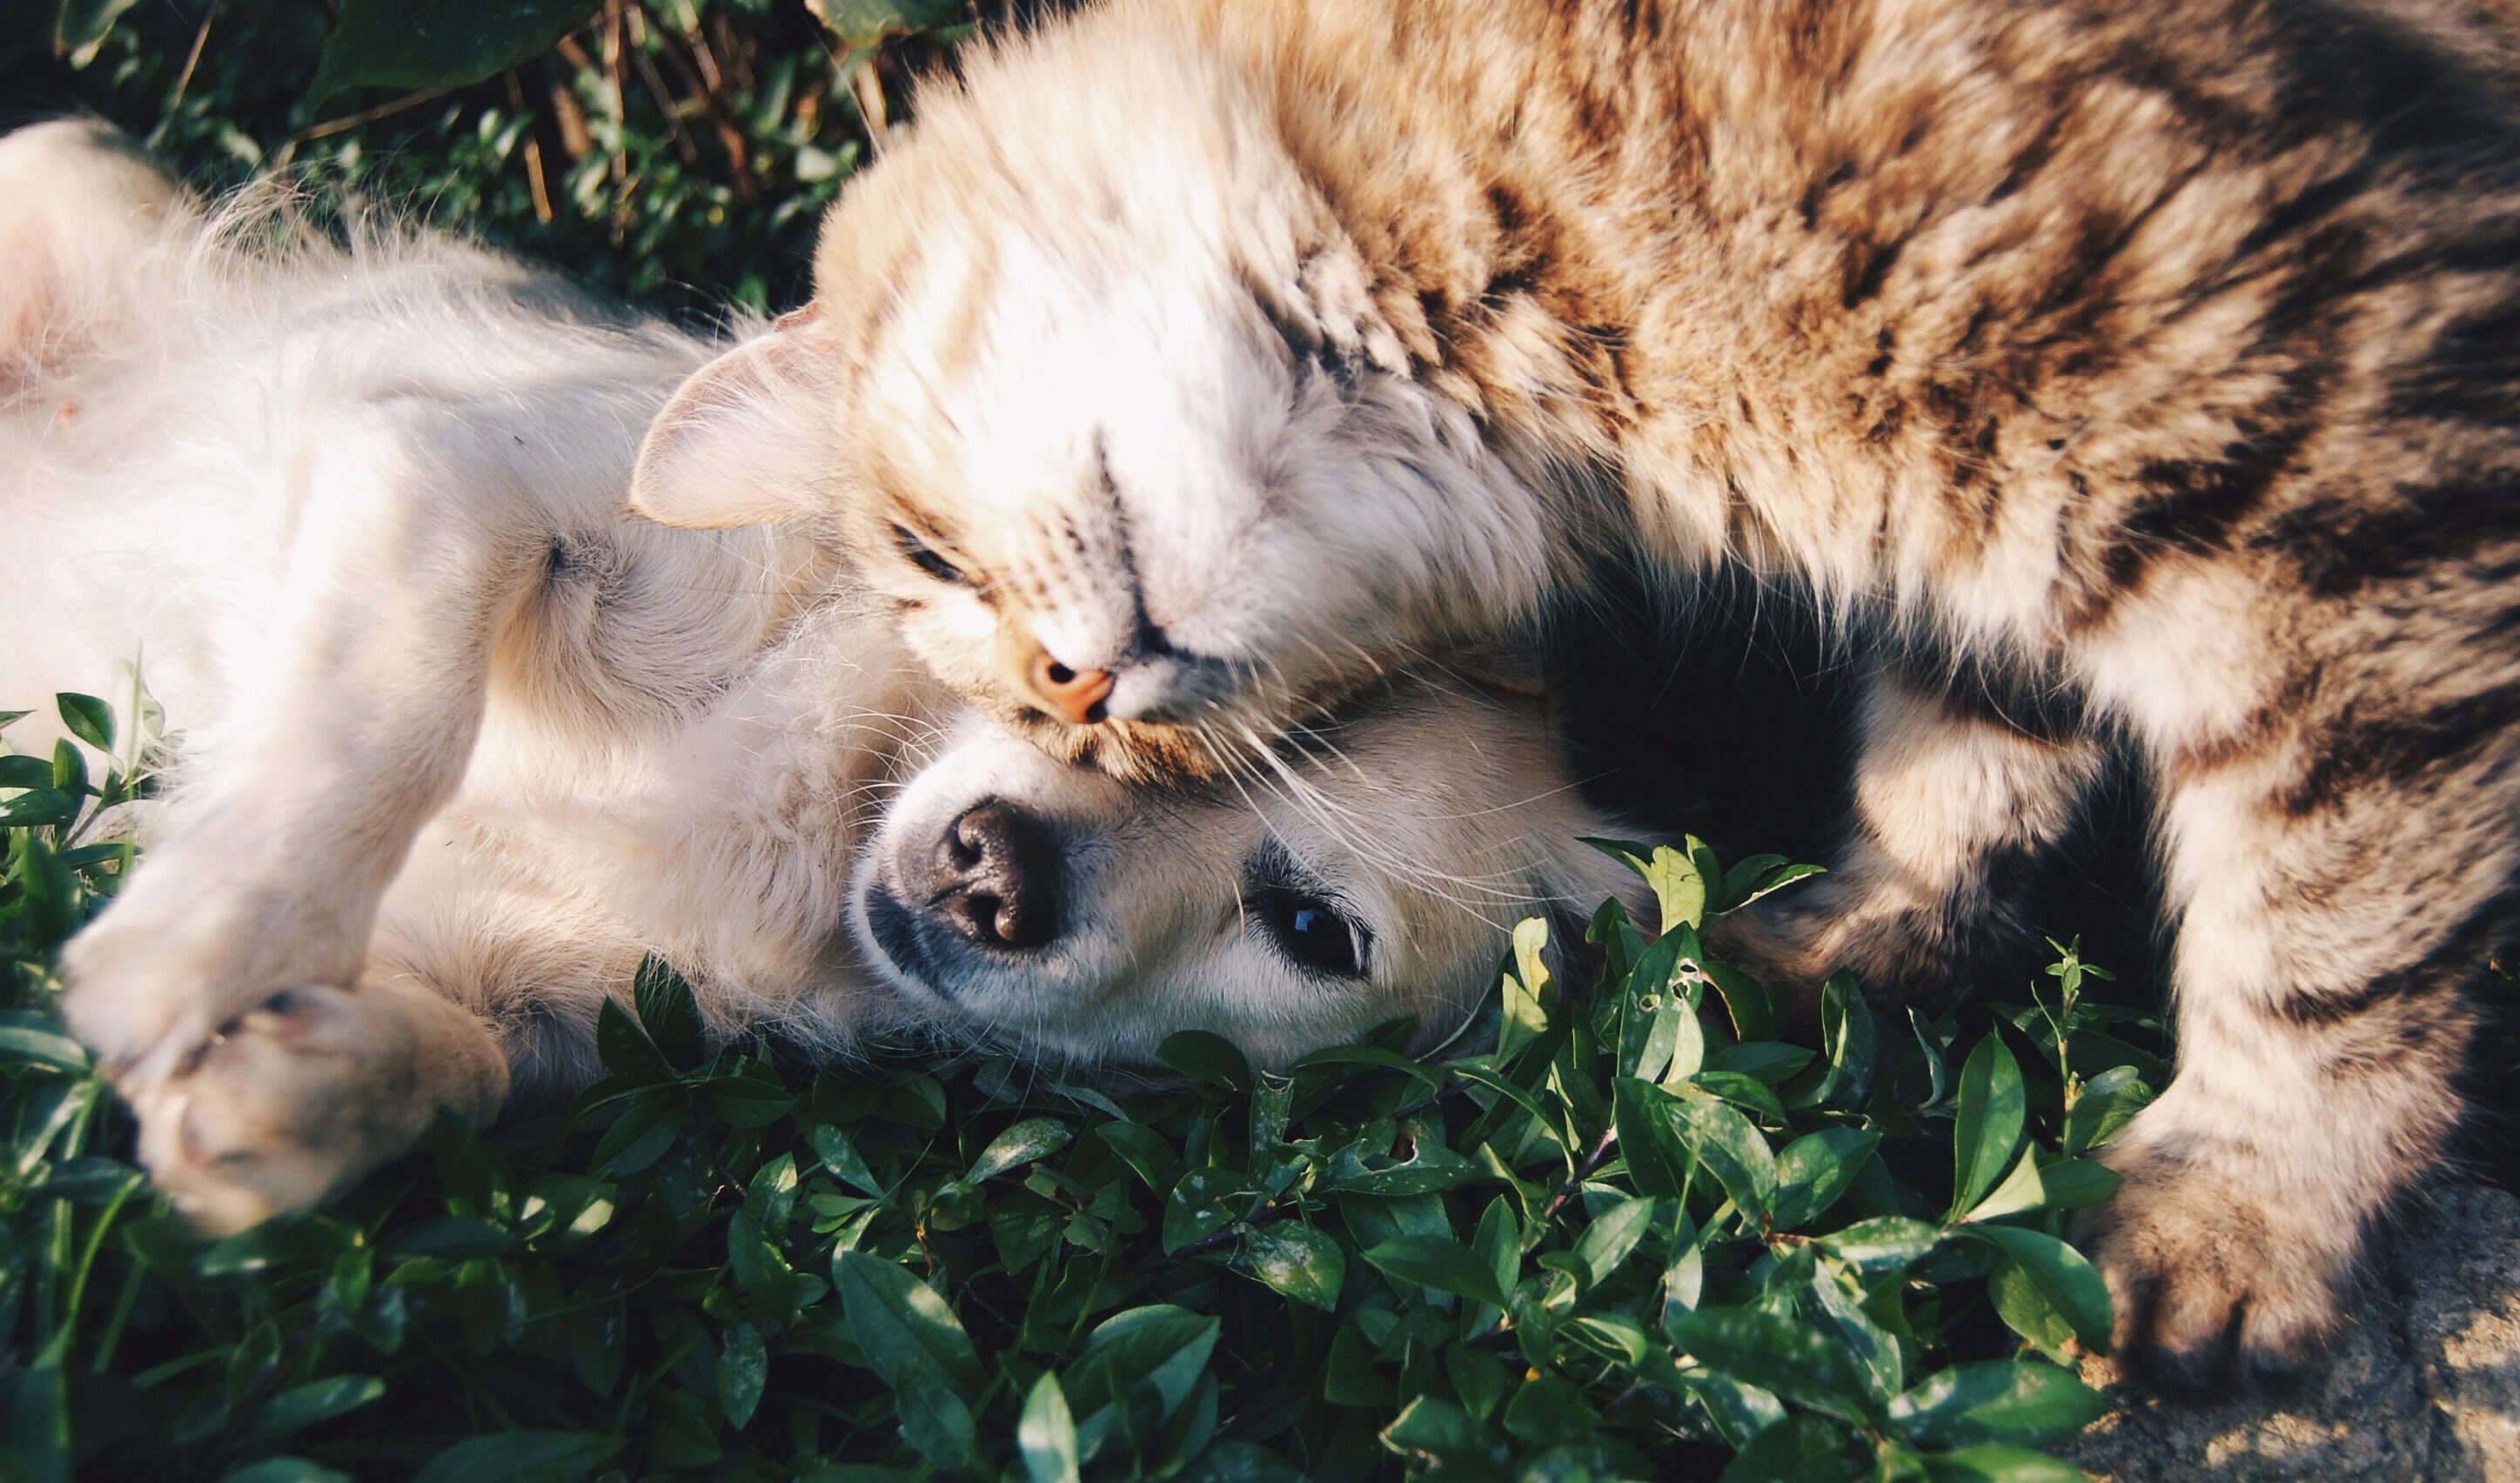 A dog and a cat playing